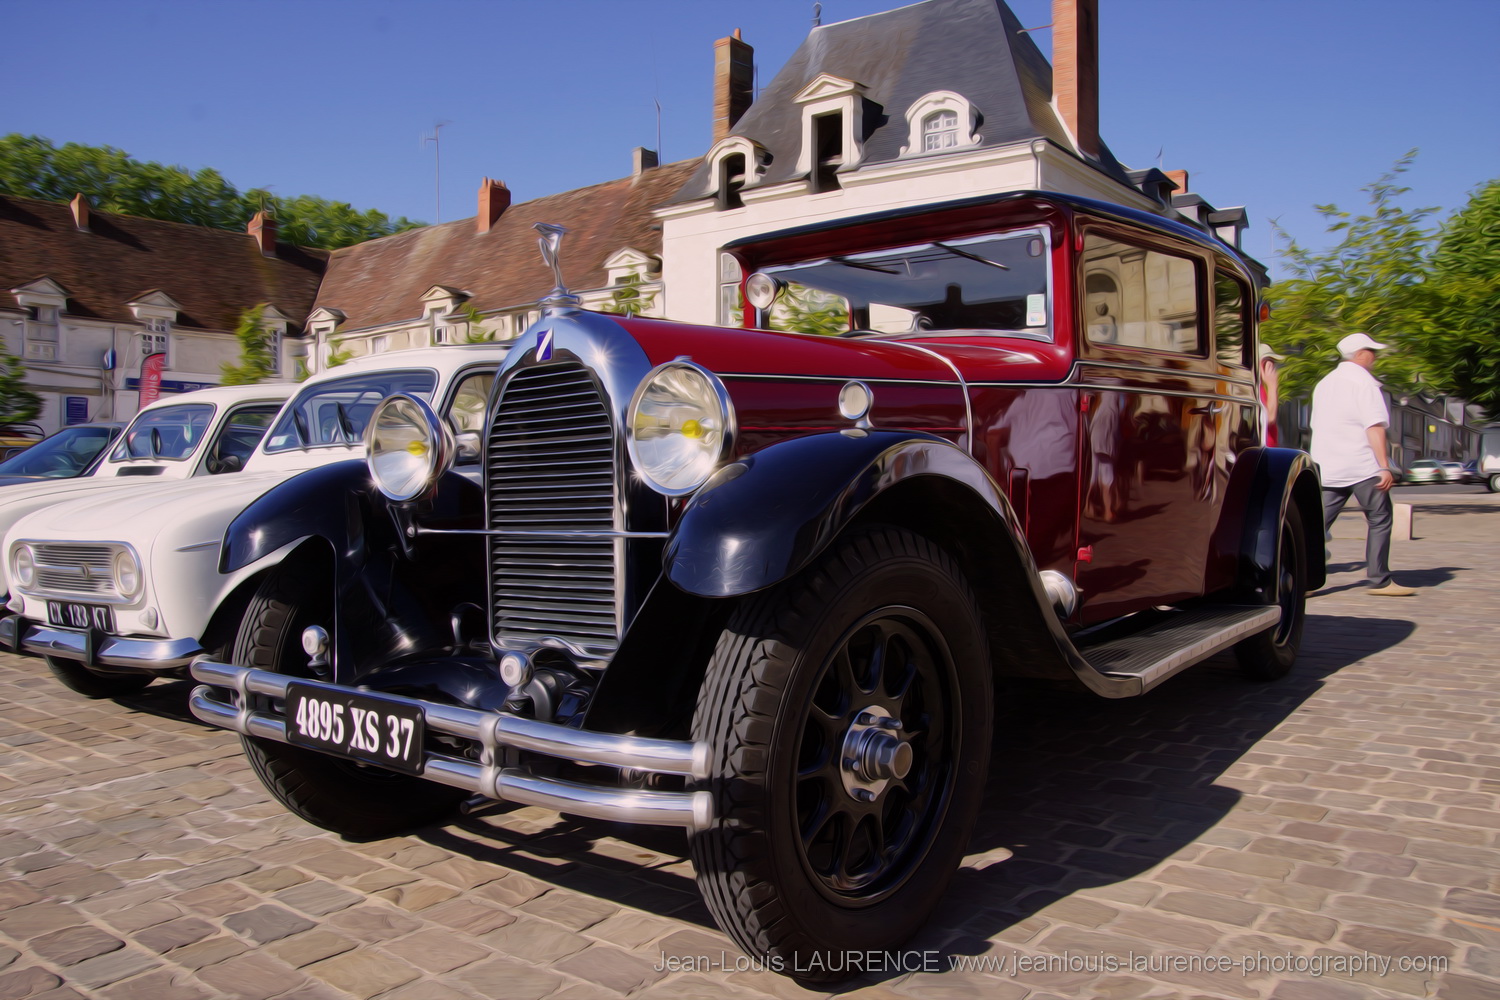 Voiture ancienne rouge – Jean-Louis LAURENCE Photography